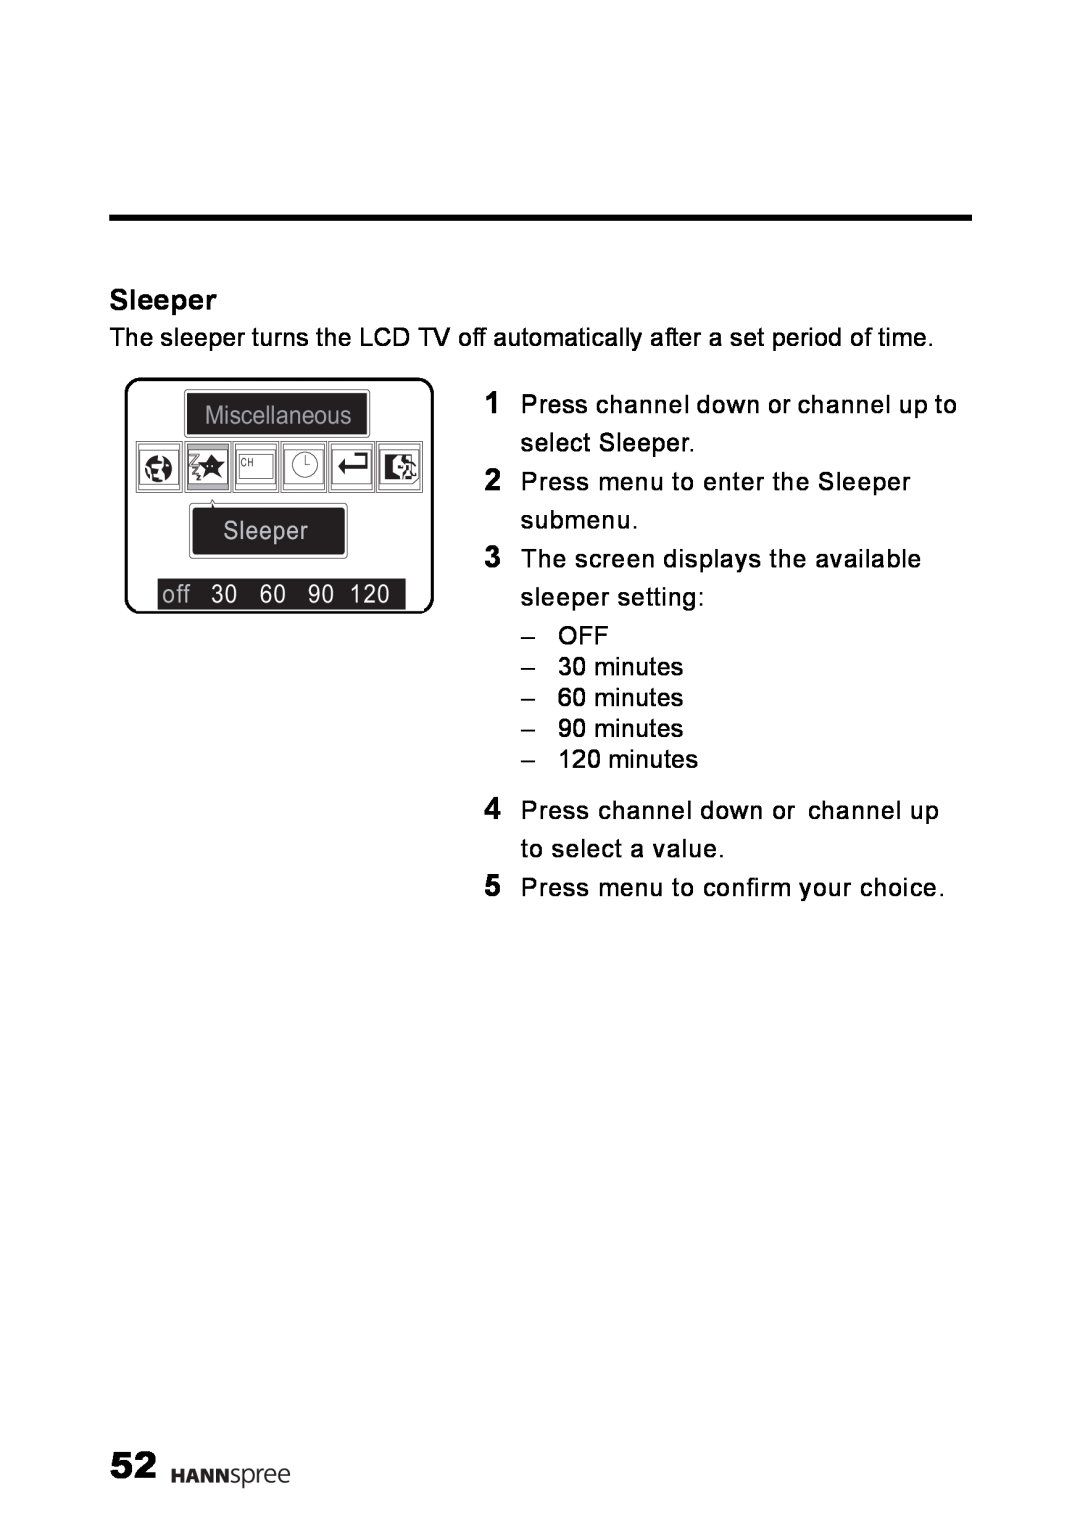 HANNspree LT02-12U1-000 user manual Miscellaneous, off 30 60 90, Press channel down or channel up to select Sleeper 